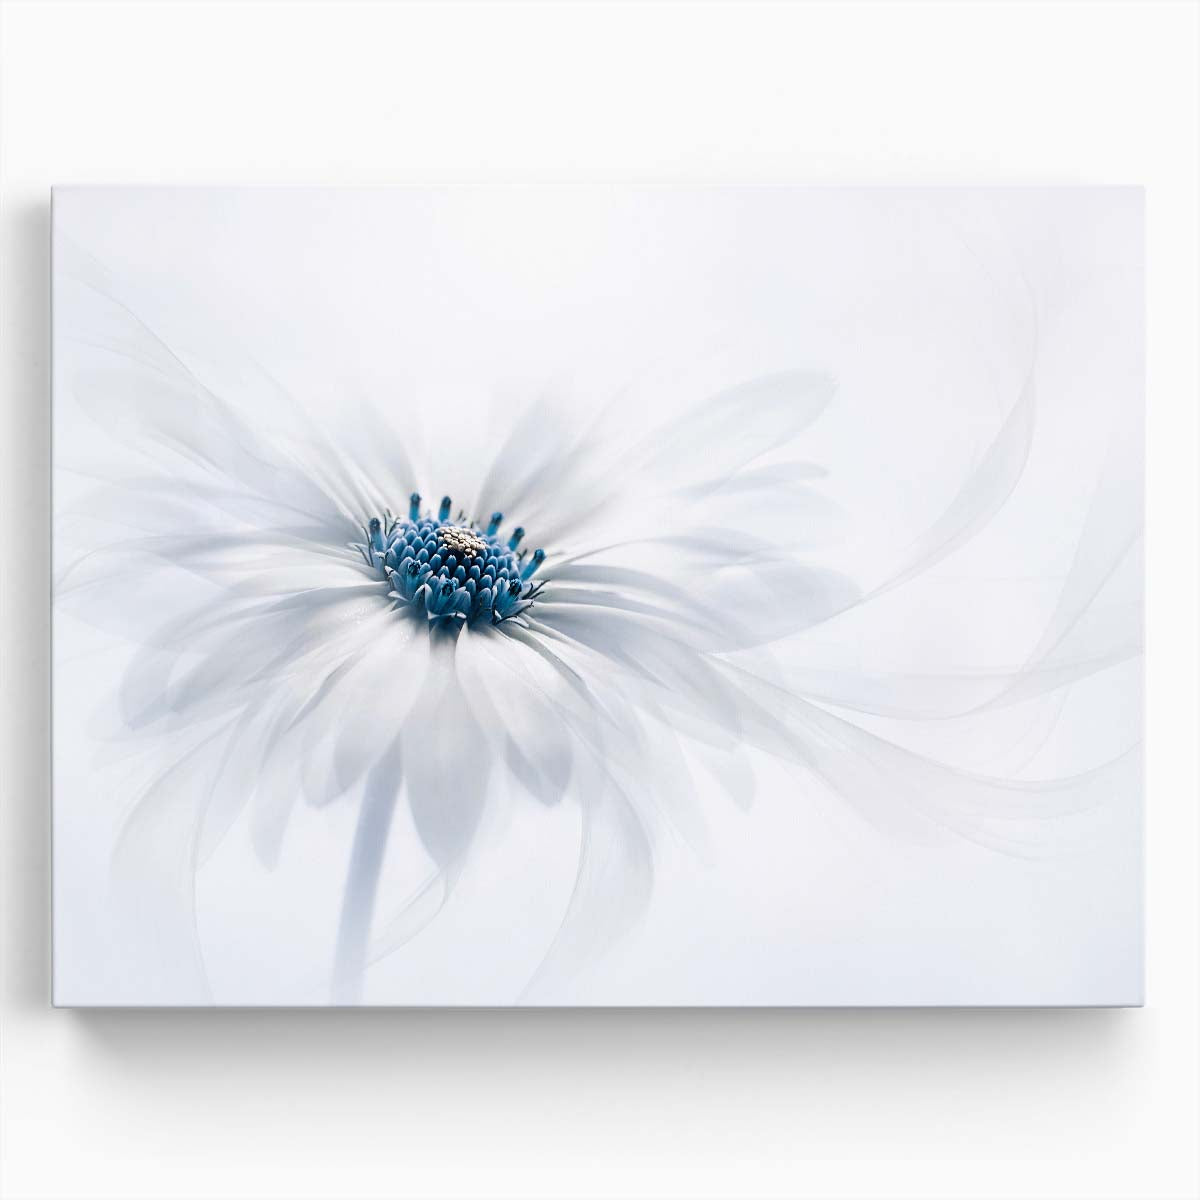 Macro Daisy Blue & White Floral Photography Wall Art by Luxuriance Designs. Made in USA.